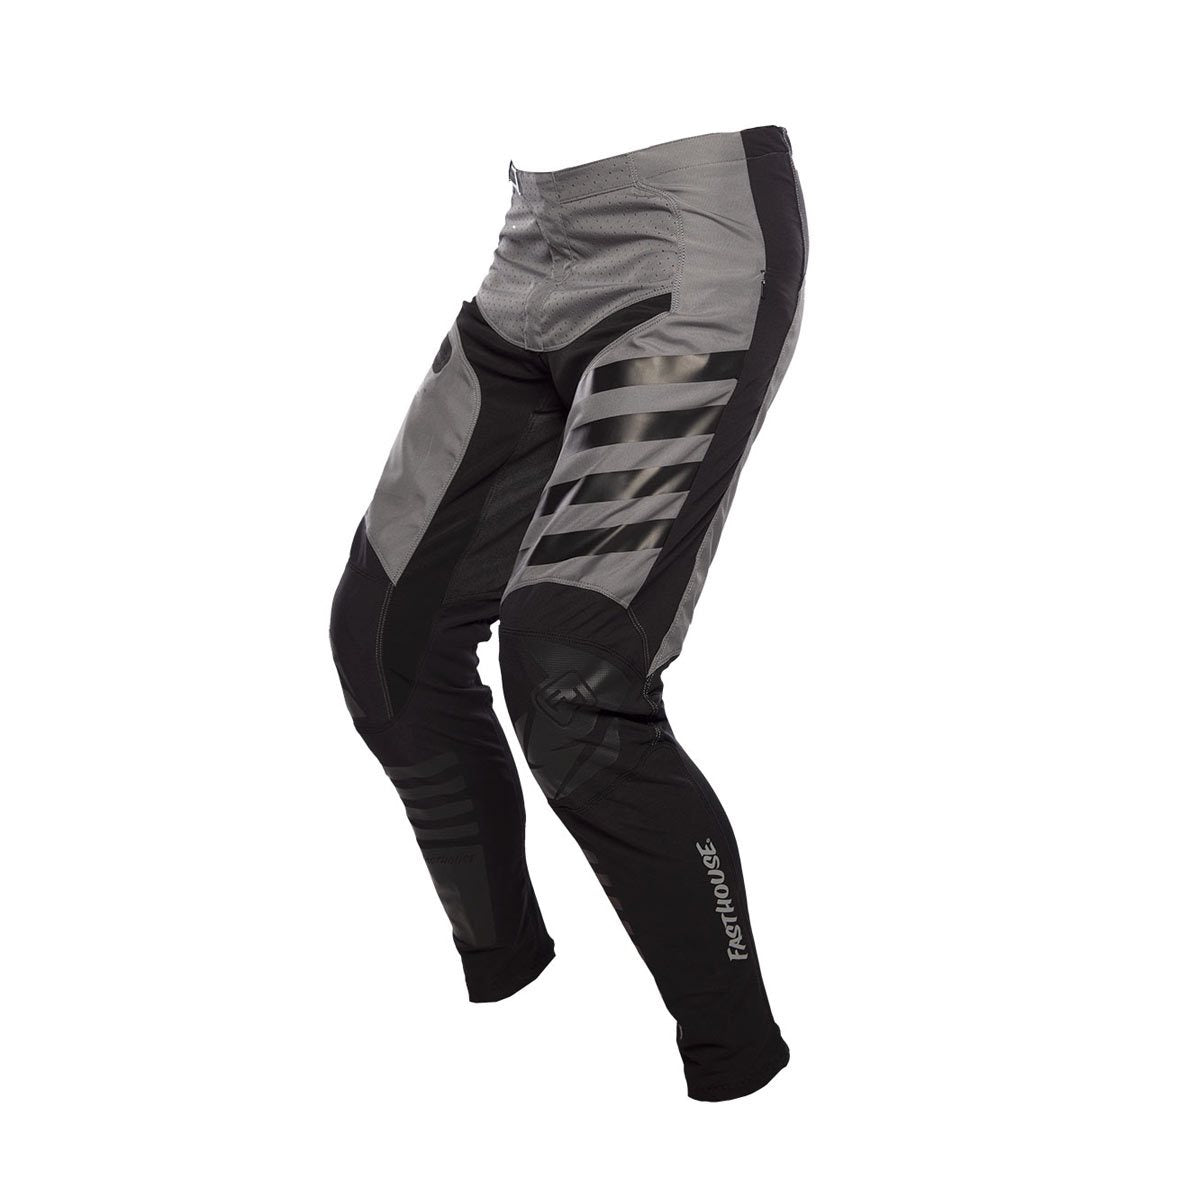 Fastline 2.0 Youth Pants